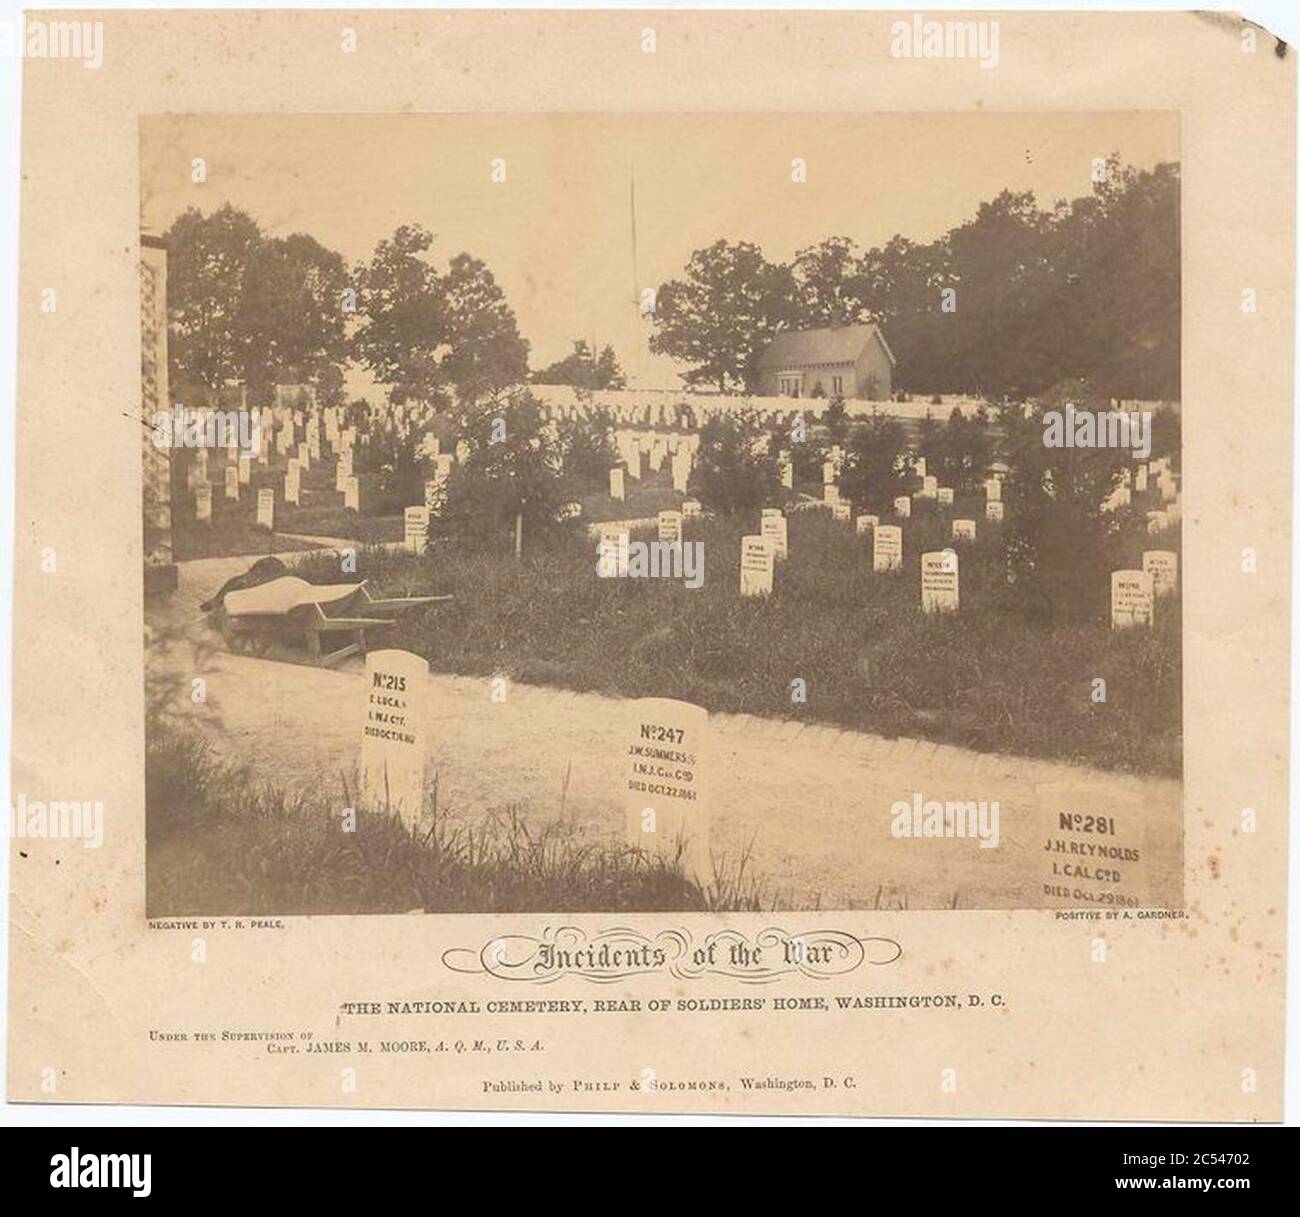 Incidents of the War - The National Cemetery, rear of Soldie... (3110851726). Stock Photo